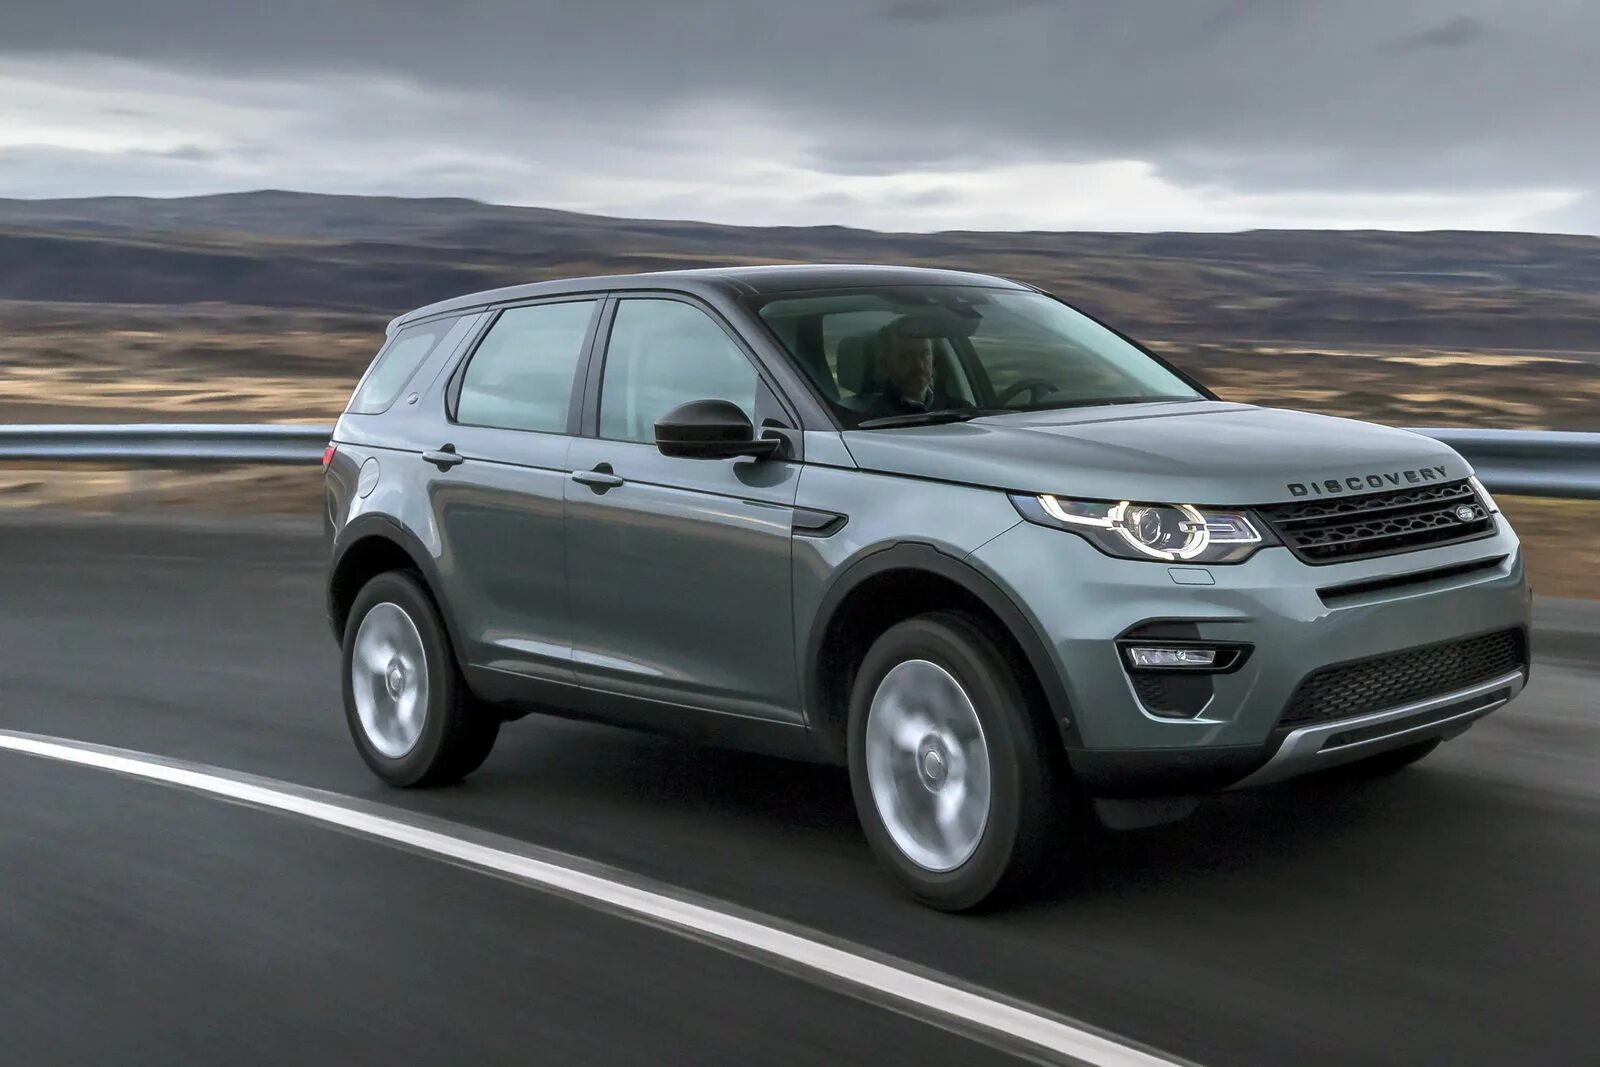 Discovery sport 2.0. Ленд Ровер Дискавери спорт 2015. Land Rover Discovery Sport 2023 новый кузов. L 550 Дискавери спорт. Land Rover Discovery Sport 2.0.